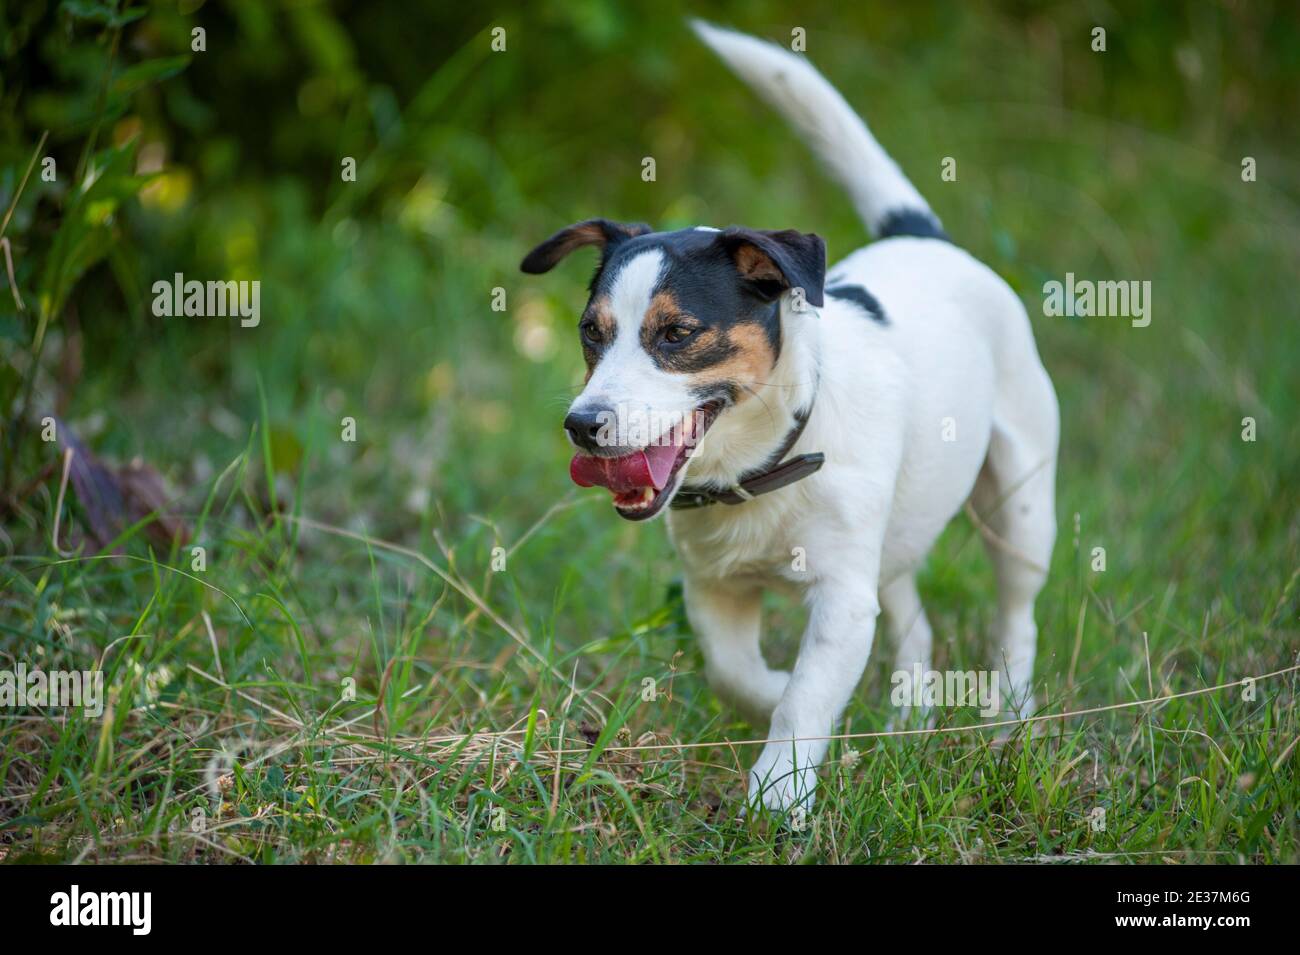 Jack Russell Terrier running free in a natural park. Natural environment, green grass Stock Photo